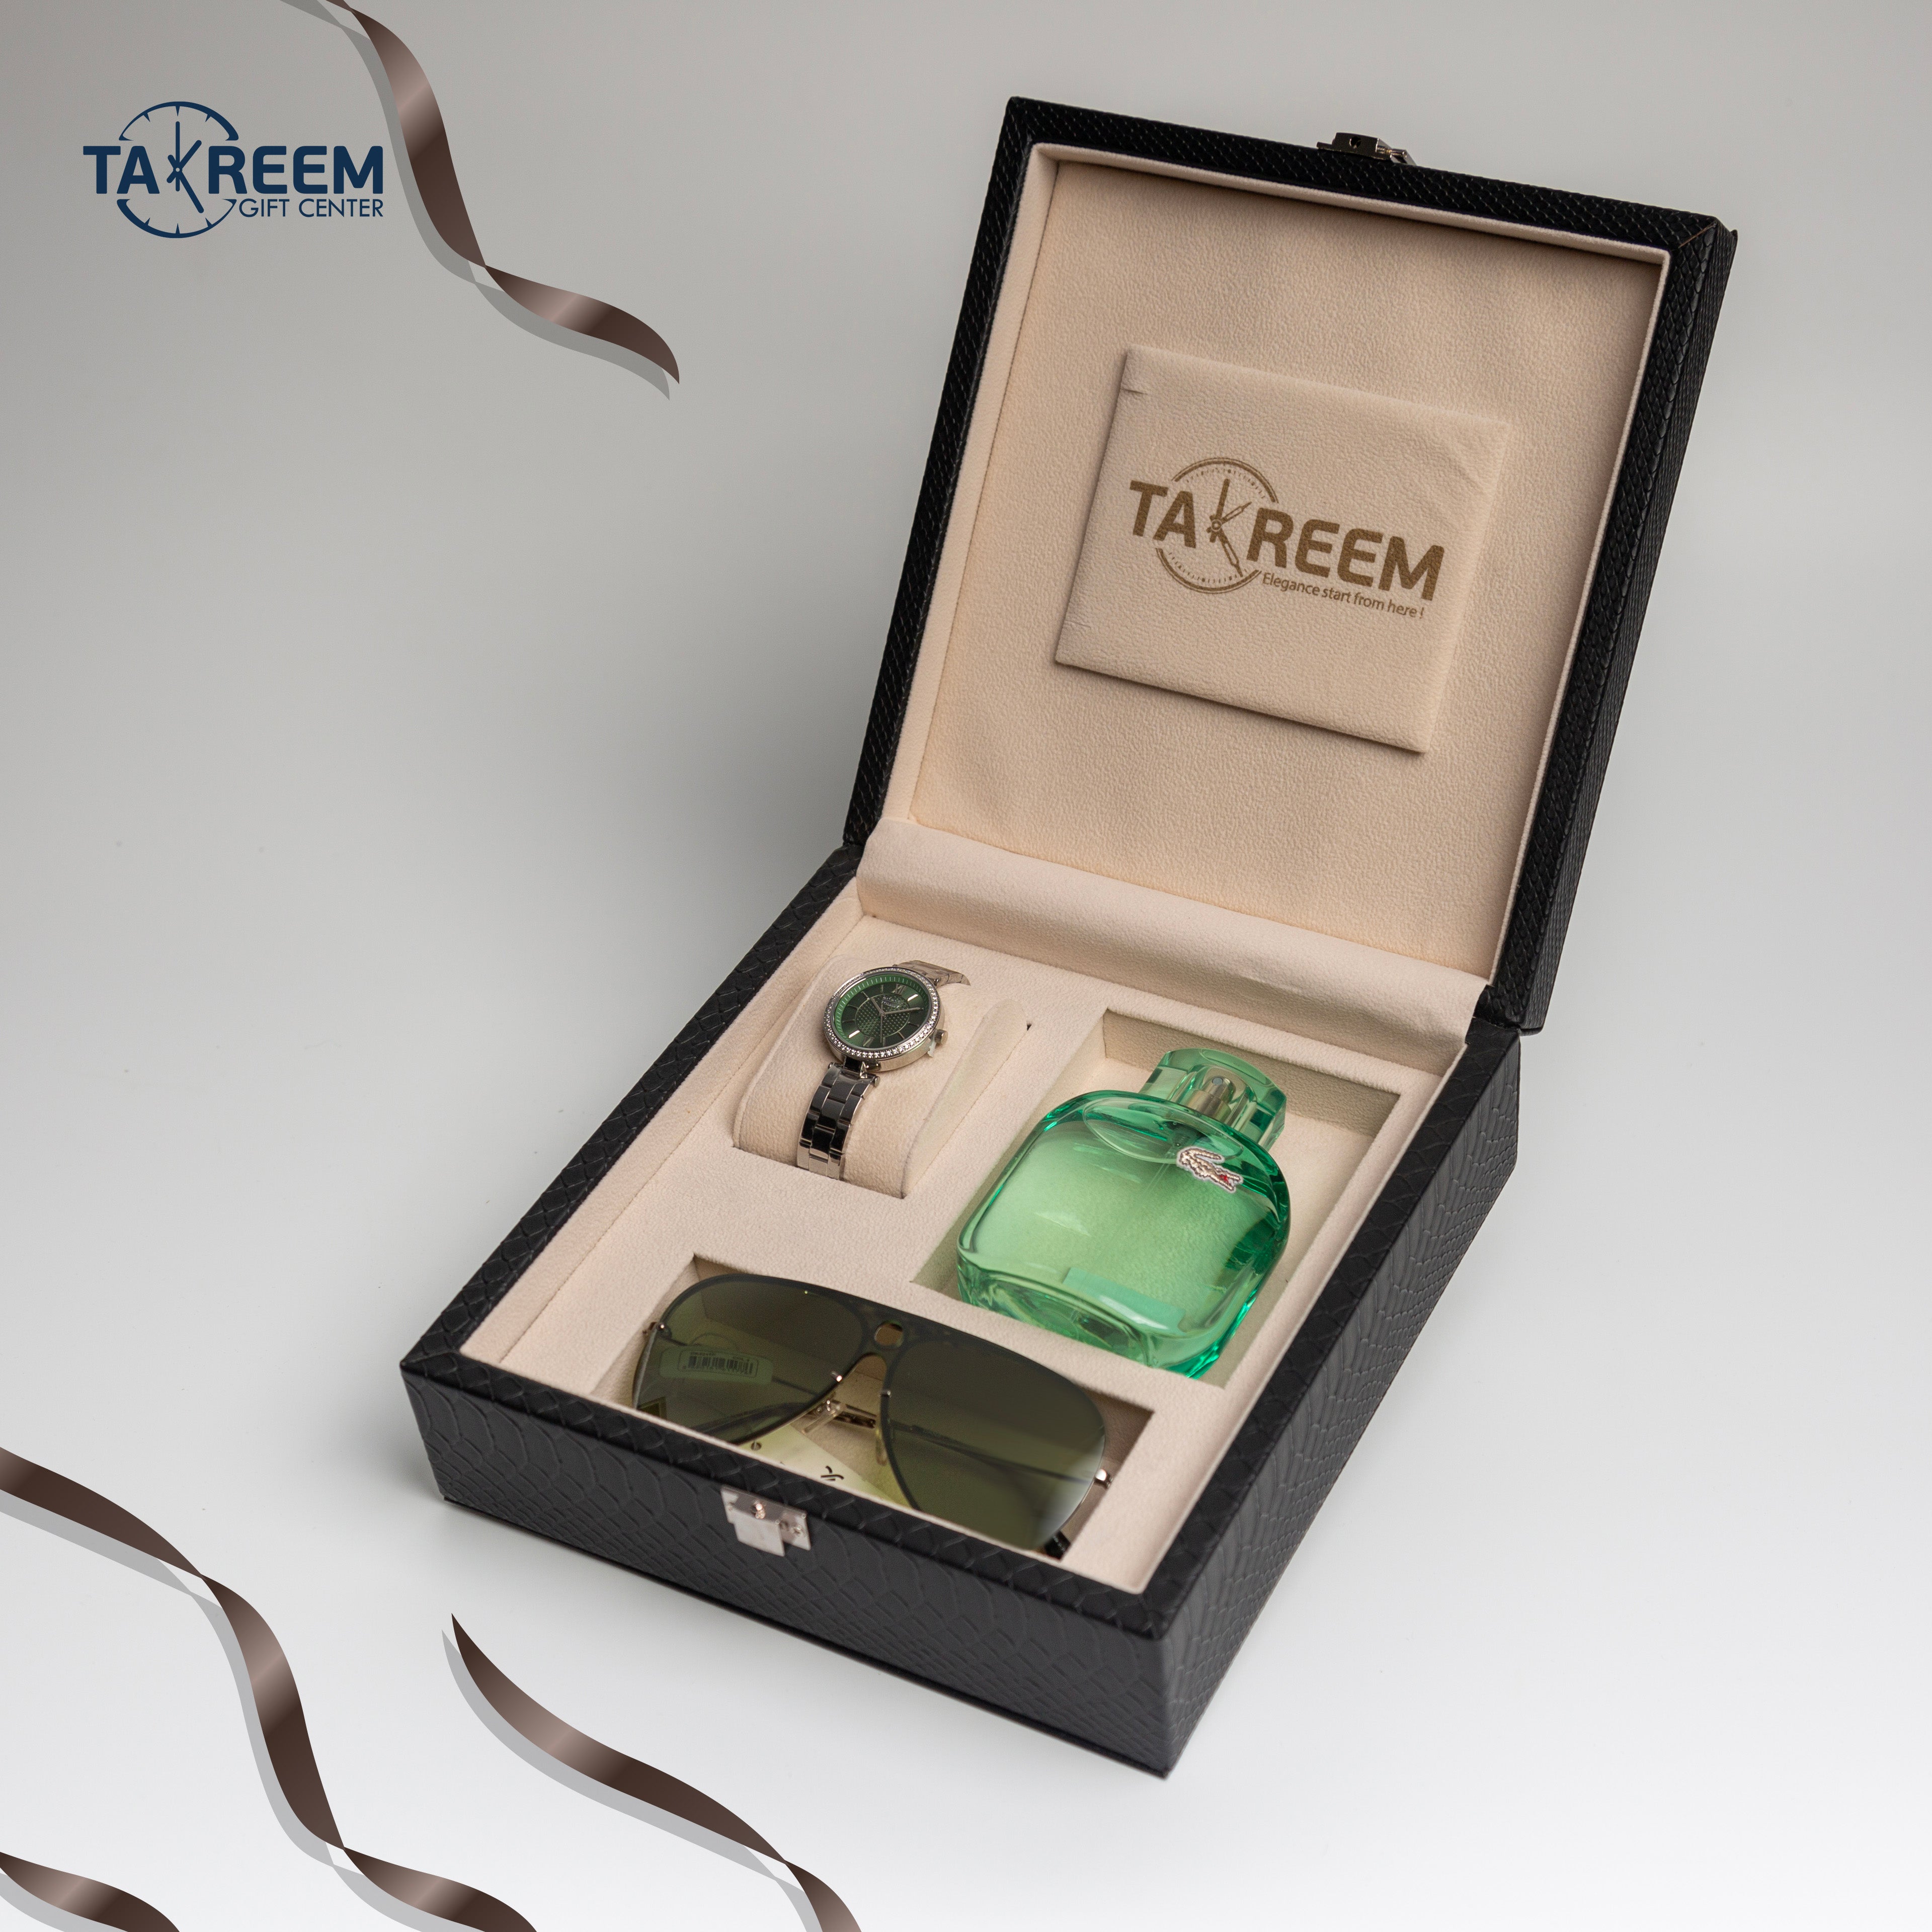 Gift Boxes By Takreem Gifts Center